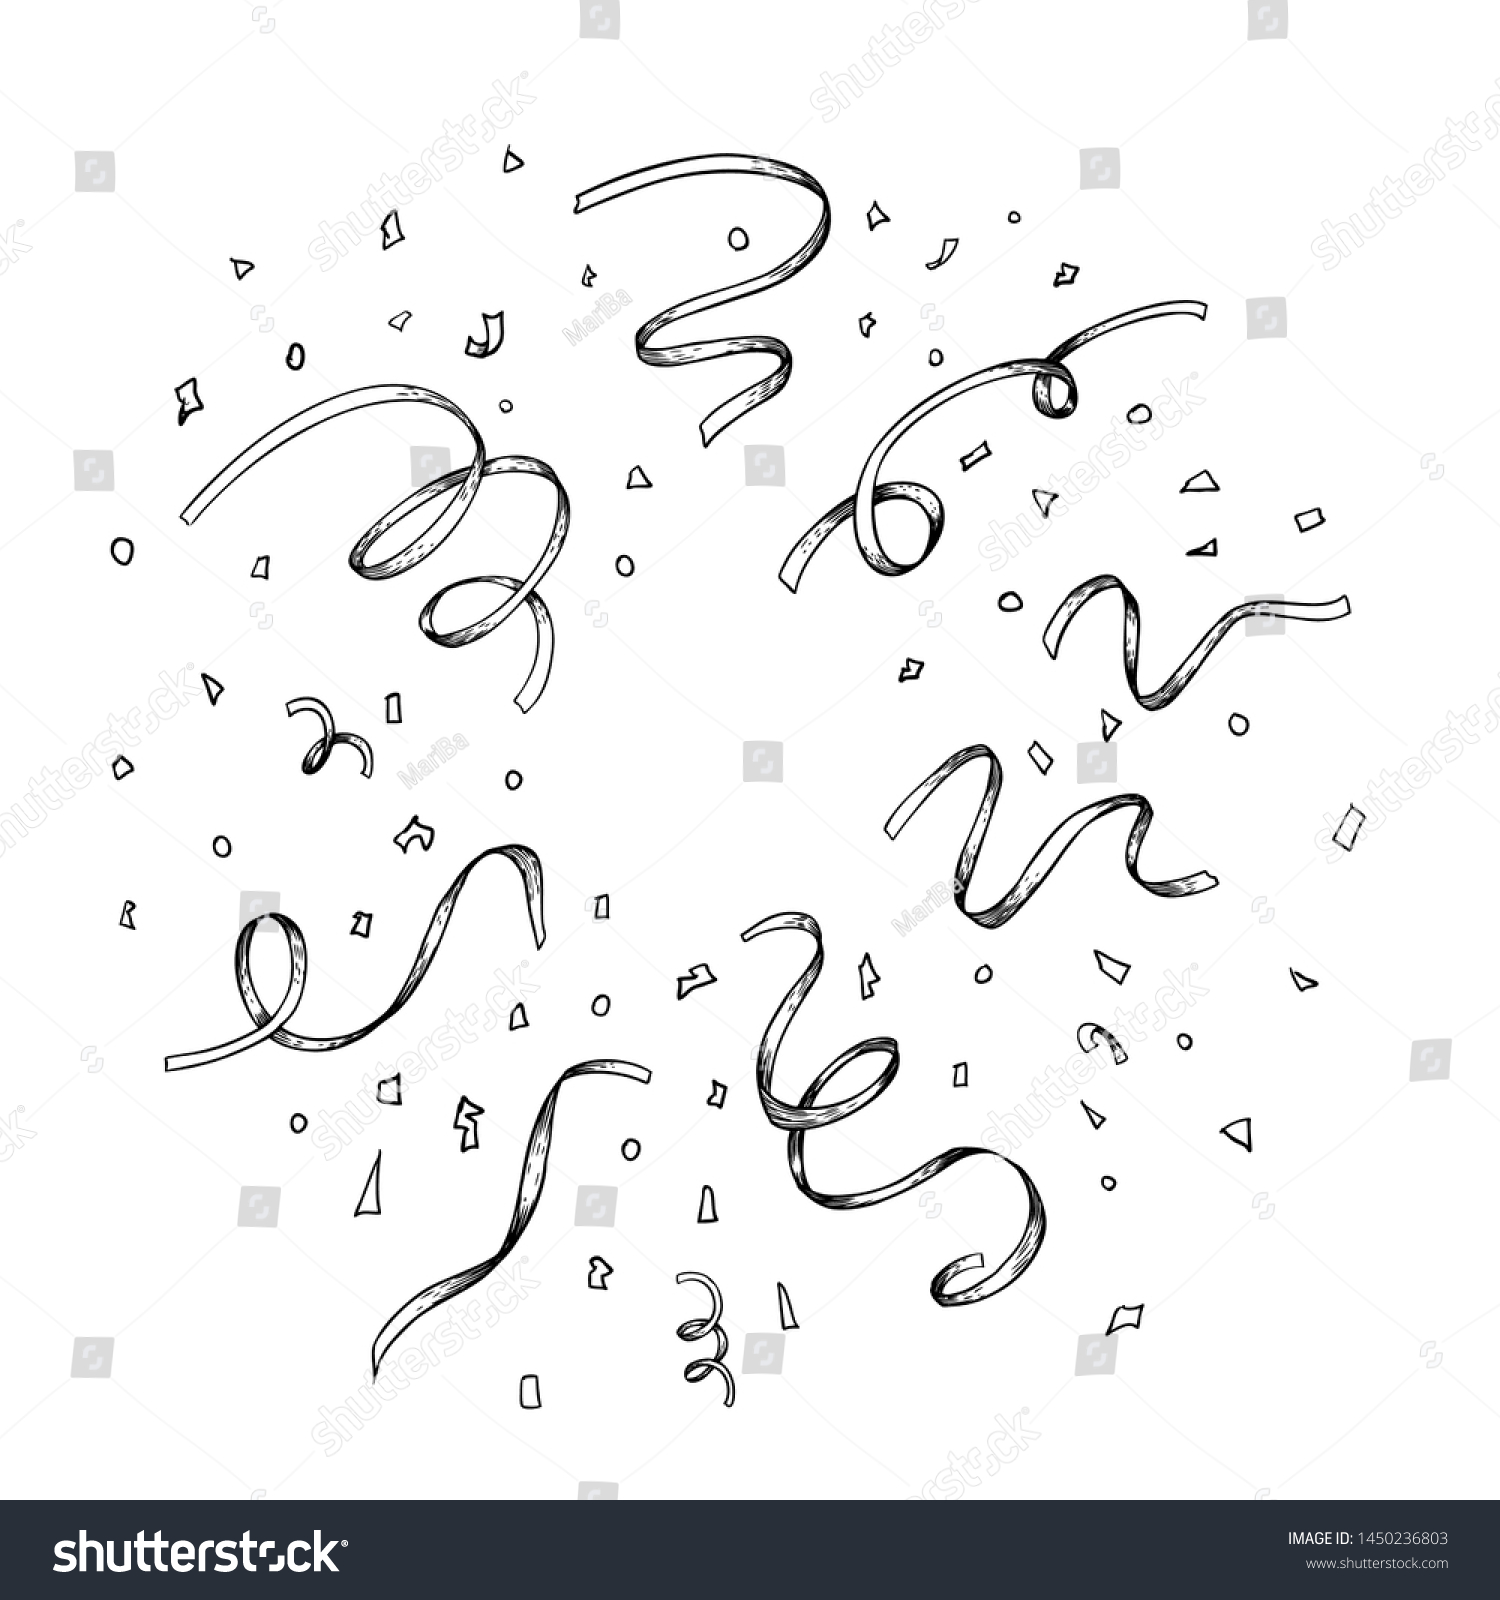 Confetti Sketches Ribbons Tinsel Clapperboard Explosion Stock Vector